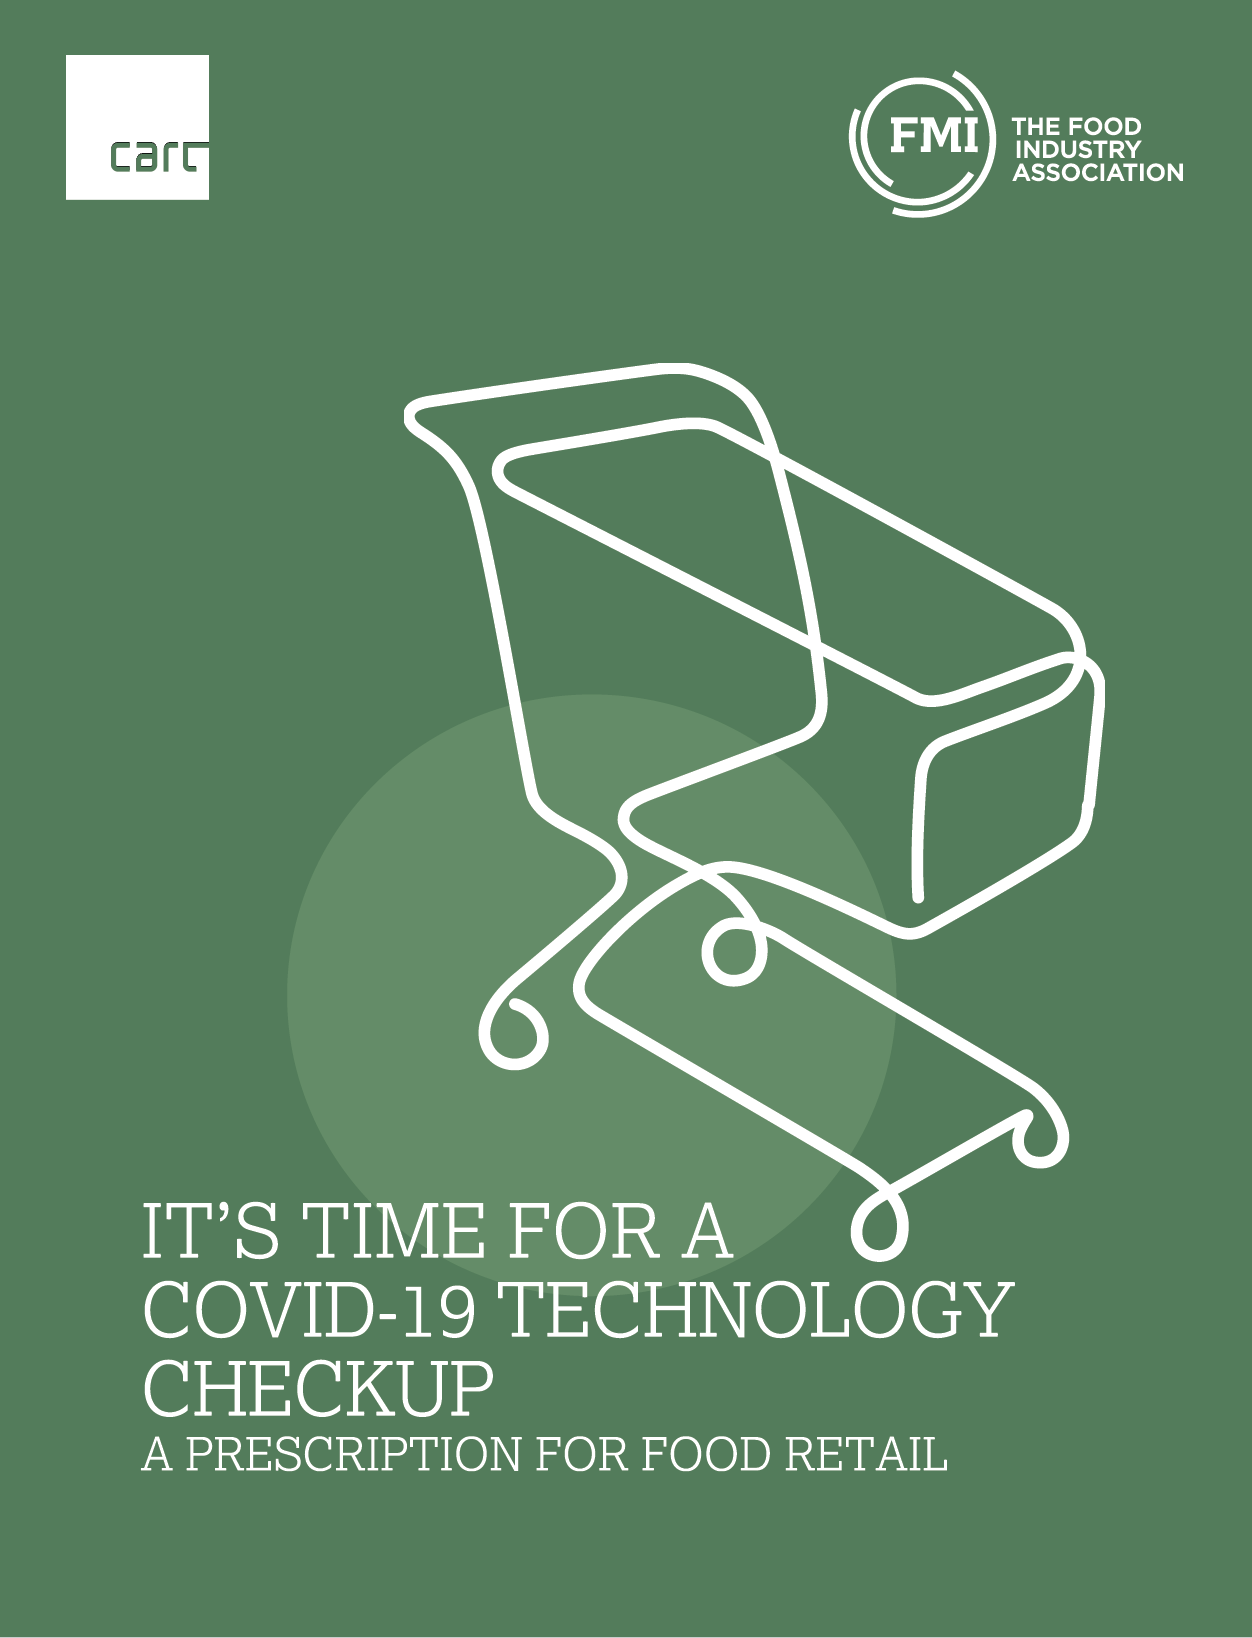 ITs time for a covid-19 technology check up cover